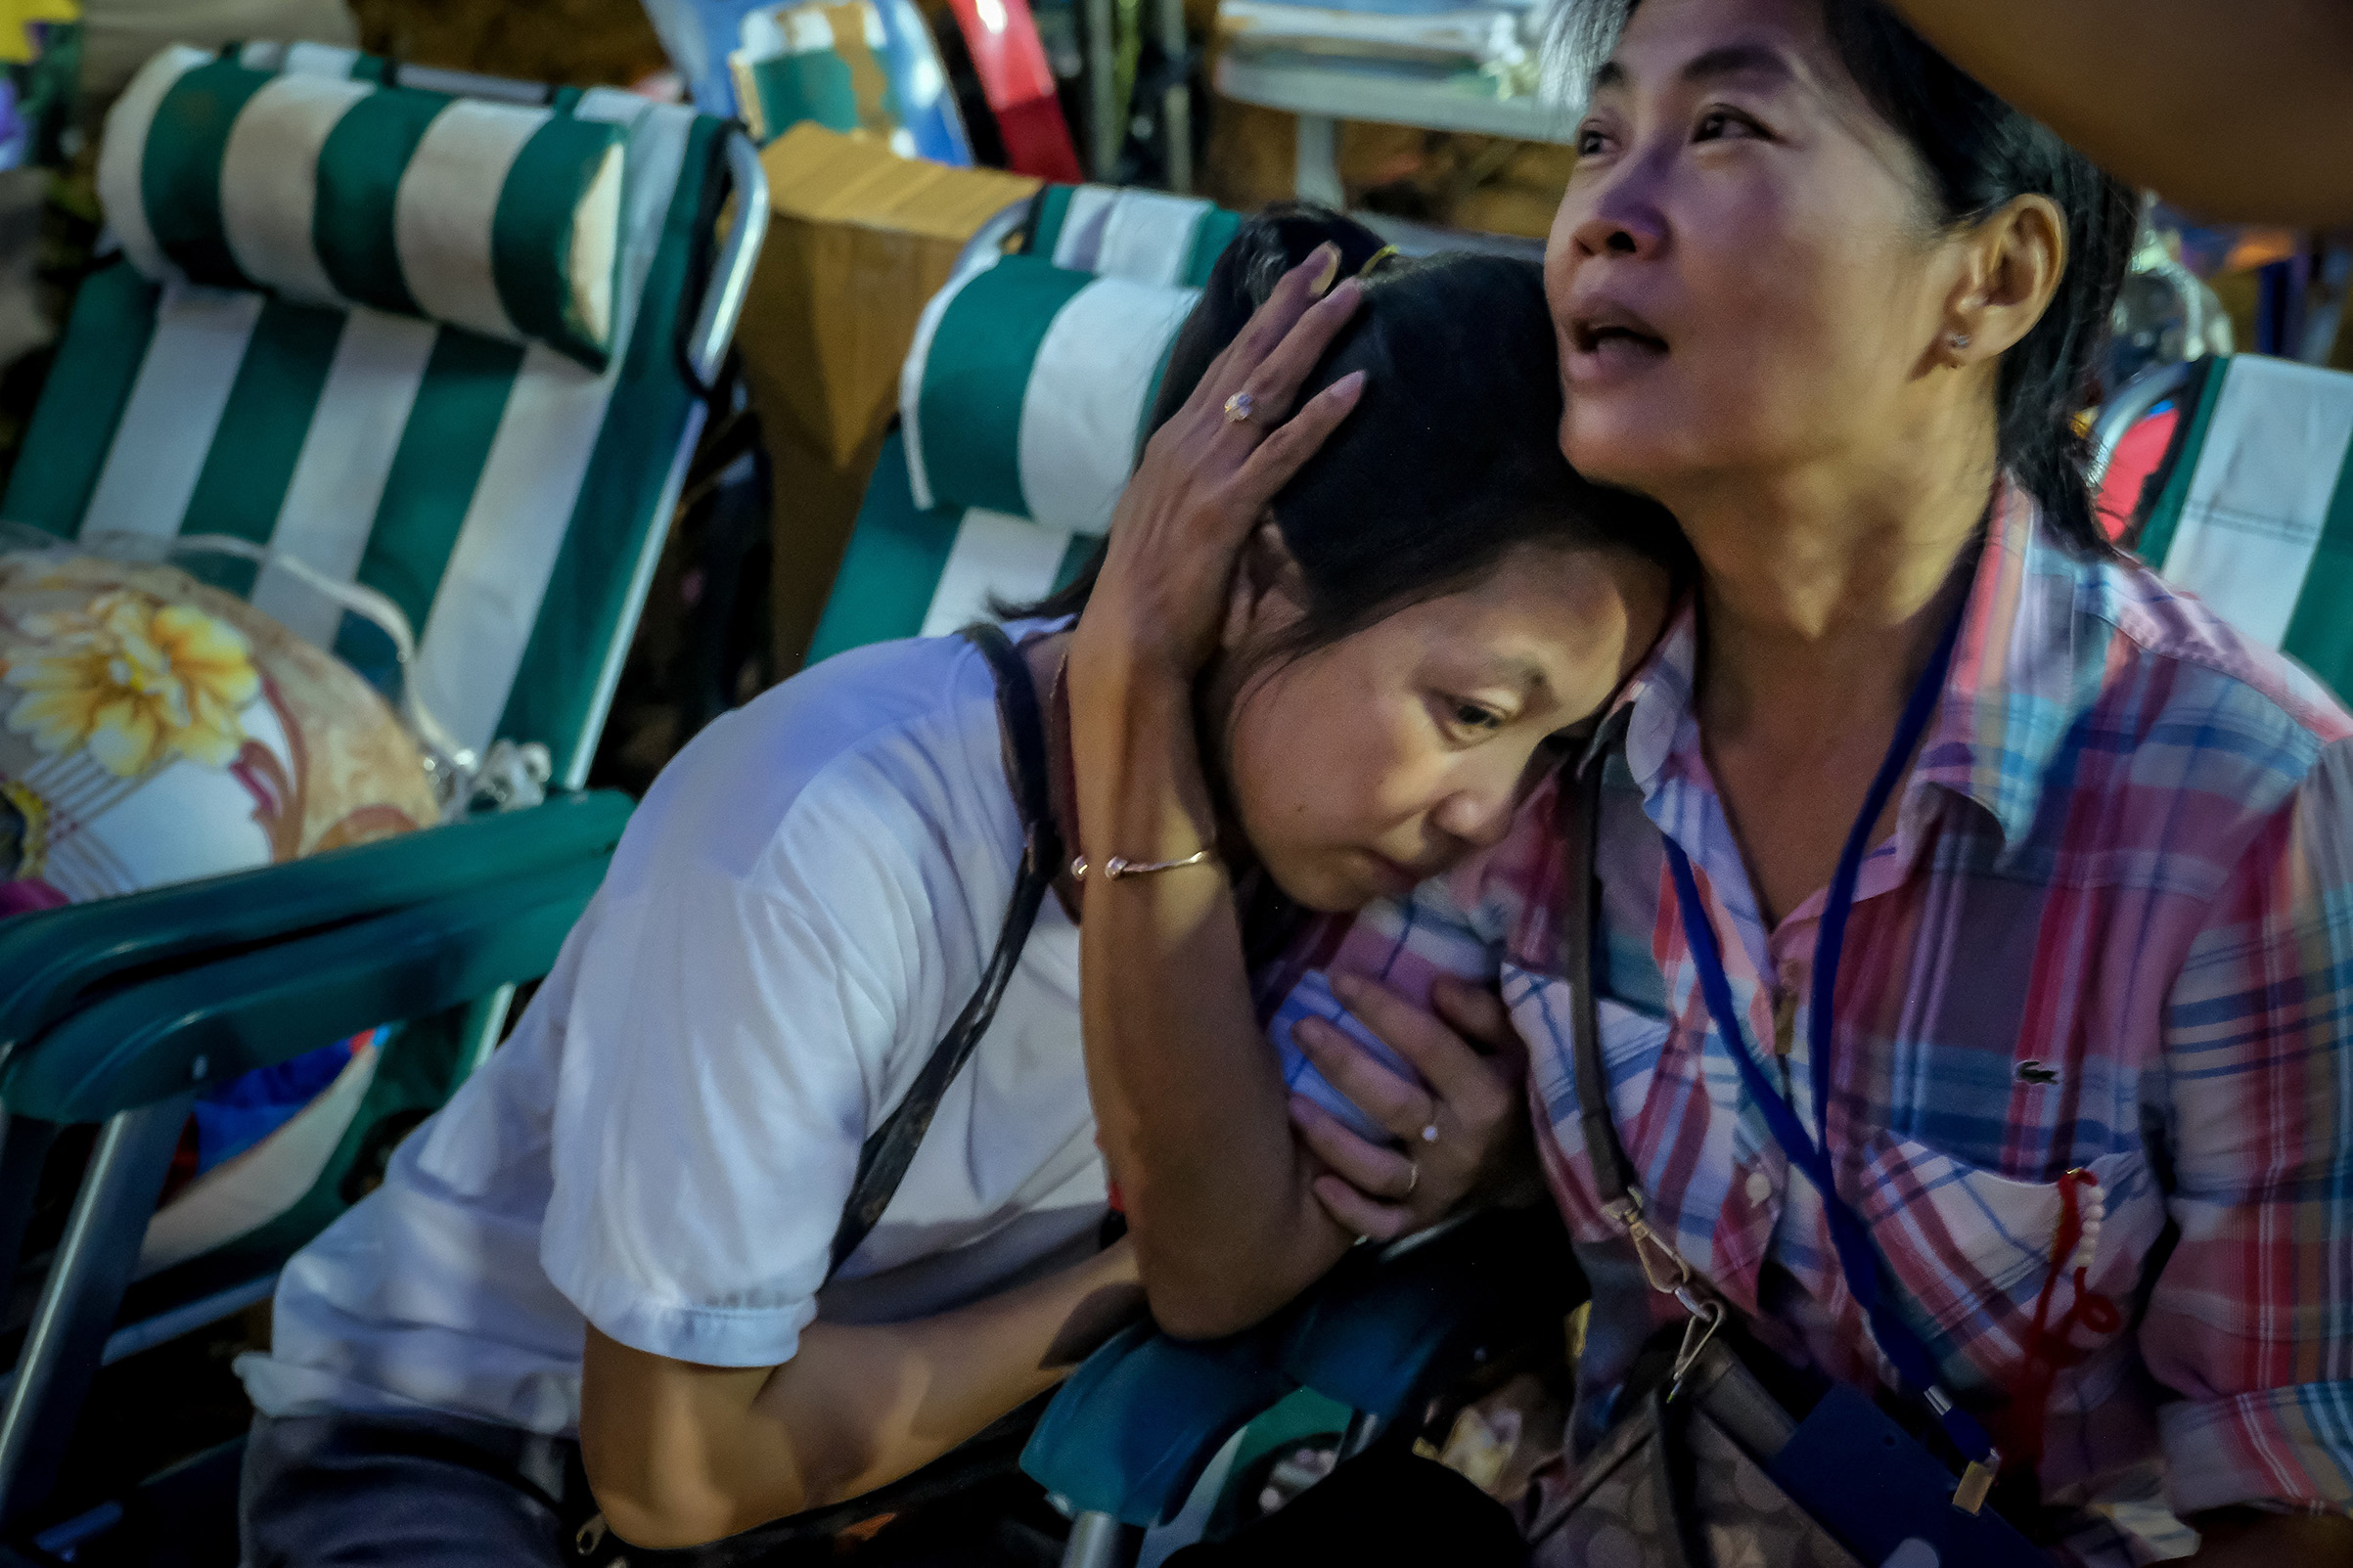 Relatives of the missing boys react after the 12 boys and their soccer coach have been found alive in the cave where they've been missing for over a week after monsoon rains blocked the main entrance on July 2, 2018 in Chiang Rai, Thailand. (Linh Pham—Getty Images)